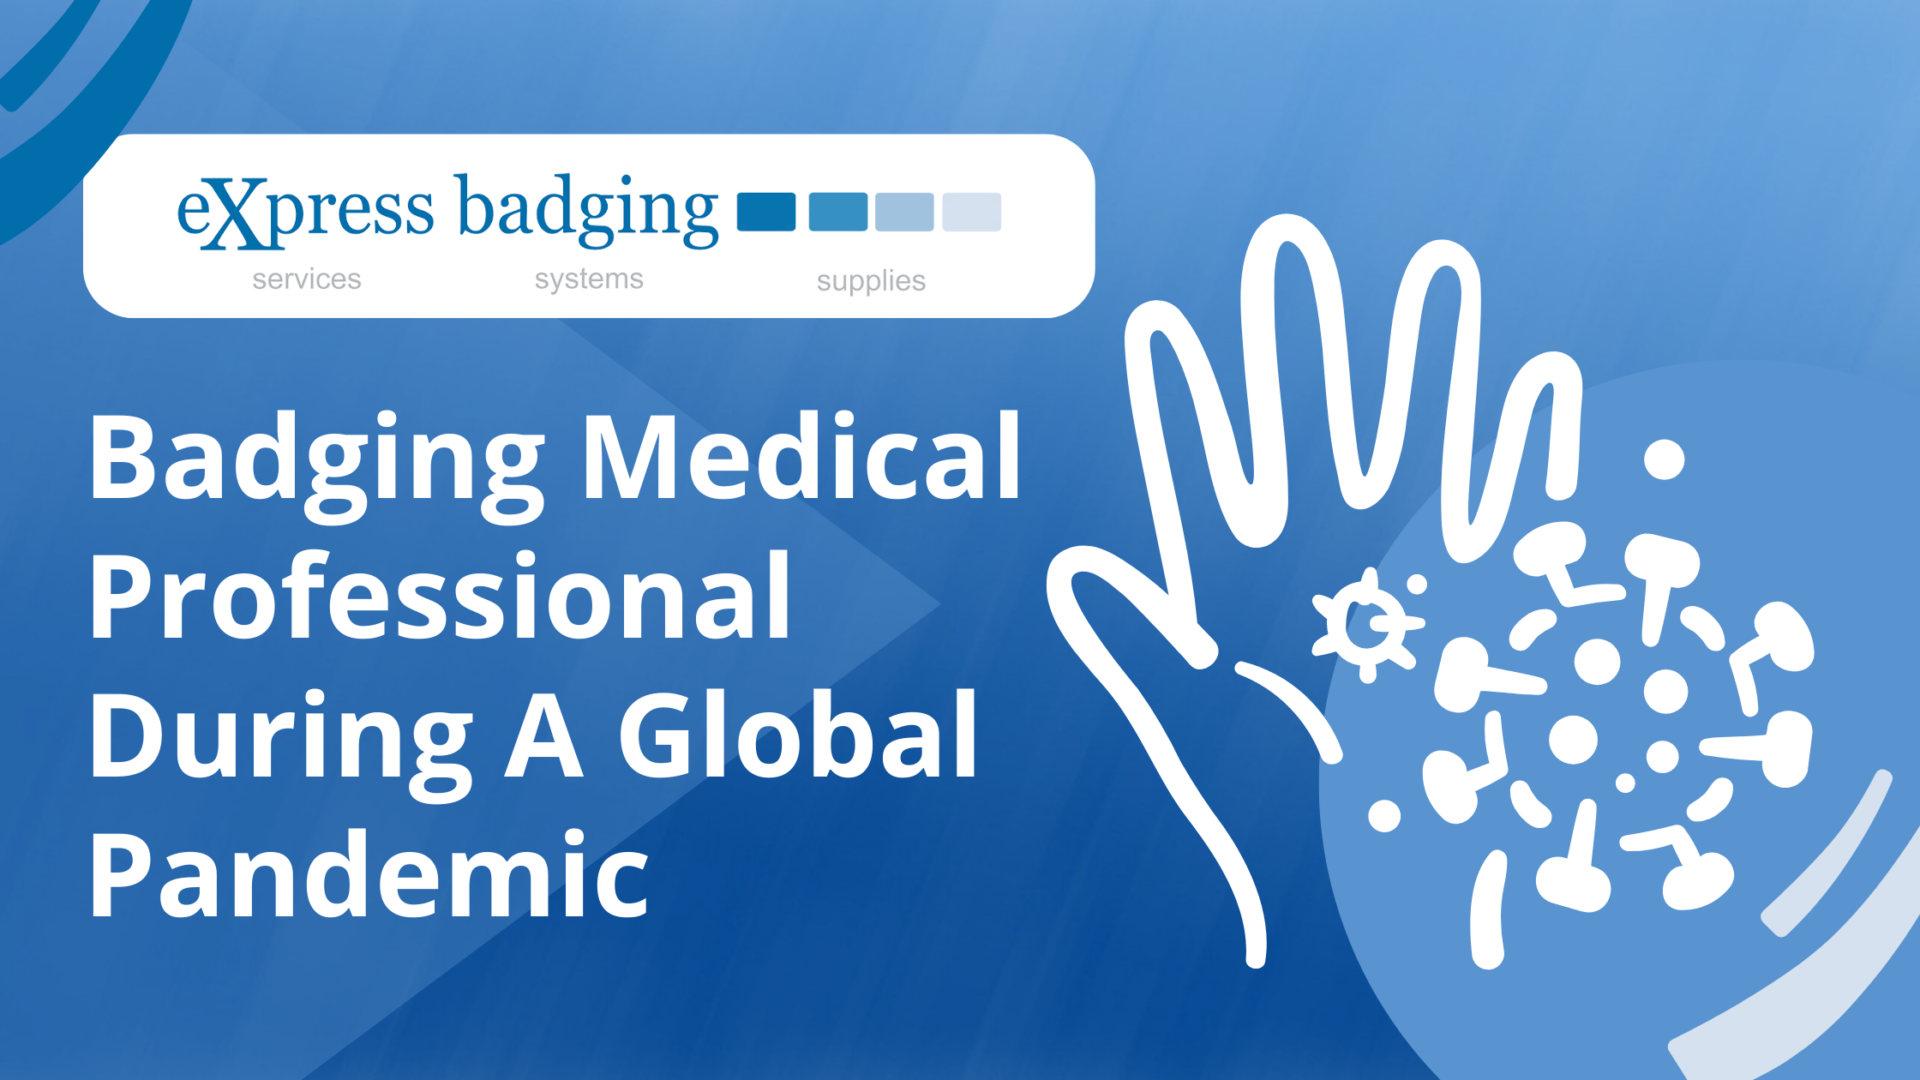 Badging Medical Professional During A Global Pandemic